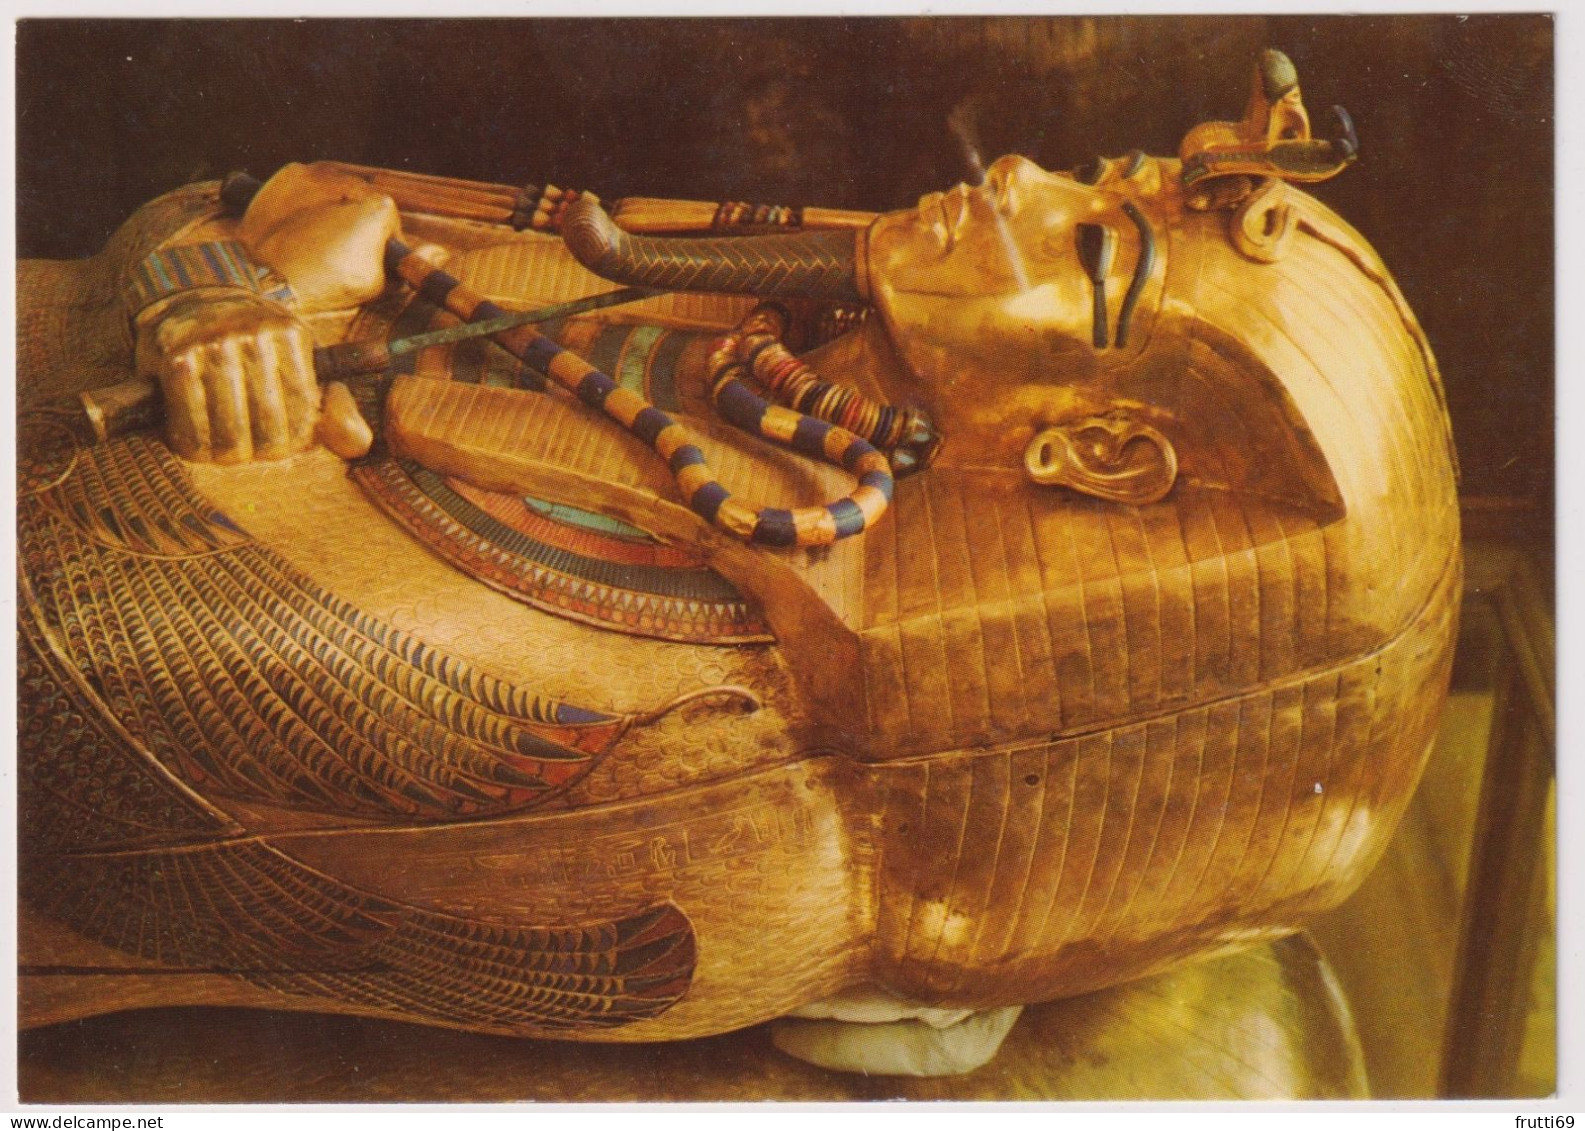 AK 198144 EGYPT - Cairo - Cairo Egyptian Museum - Tut Ankh Amun's Treasures - Second Coffin - Museums